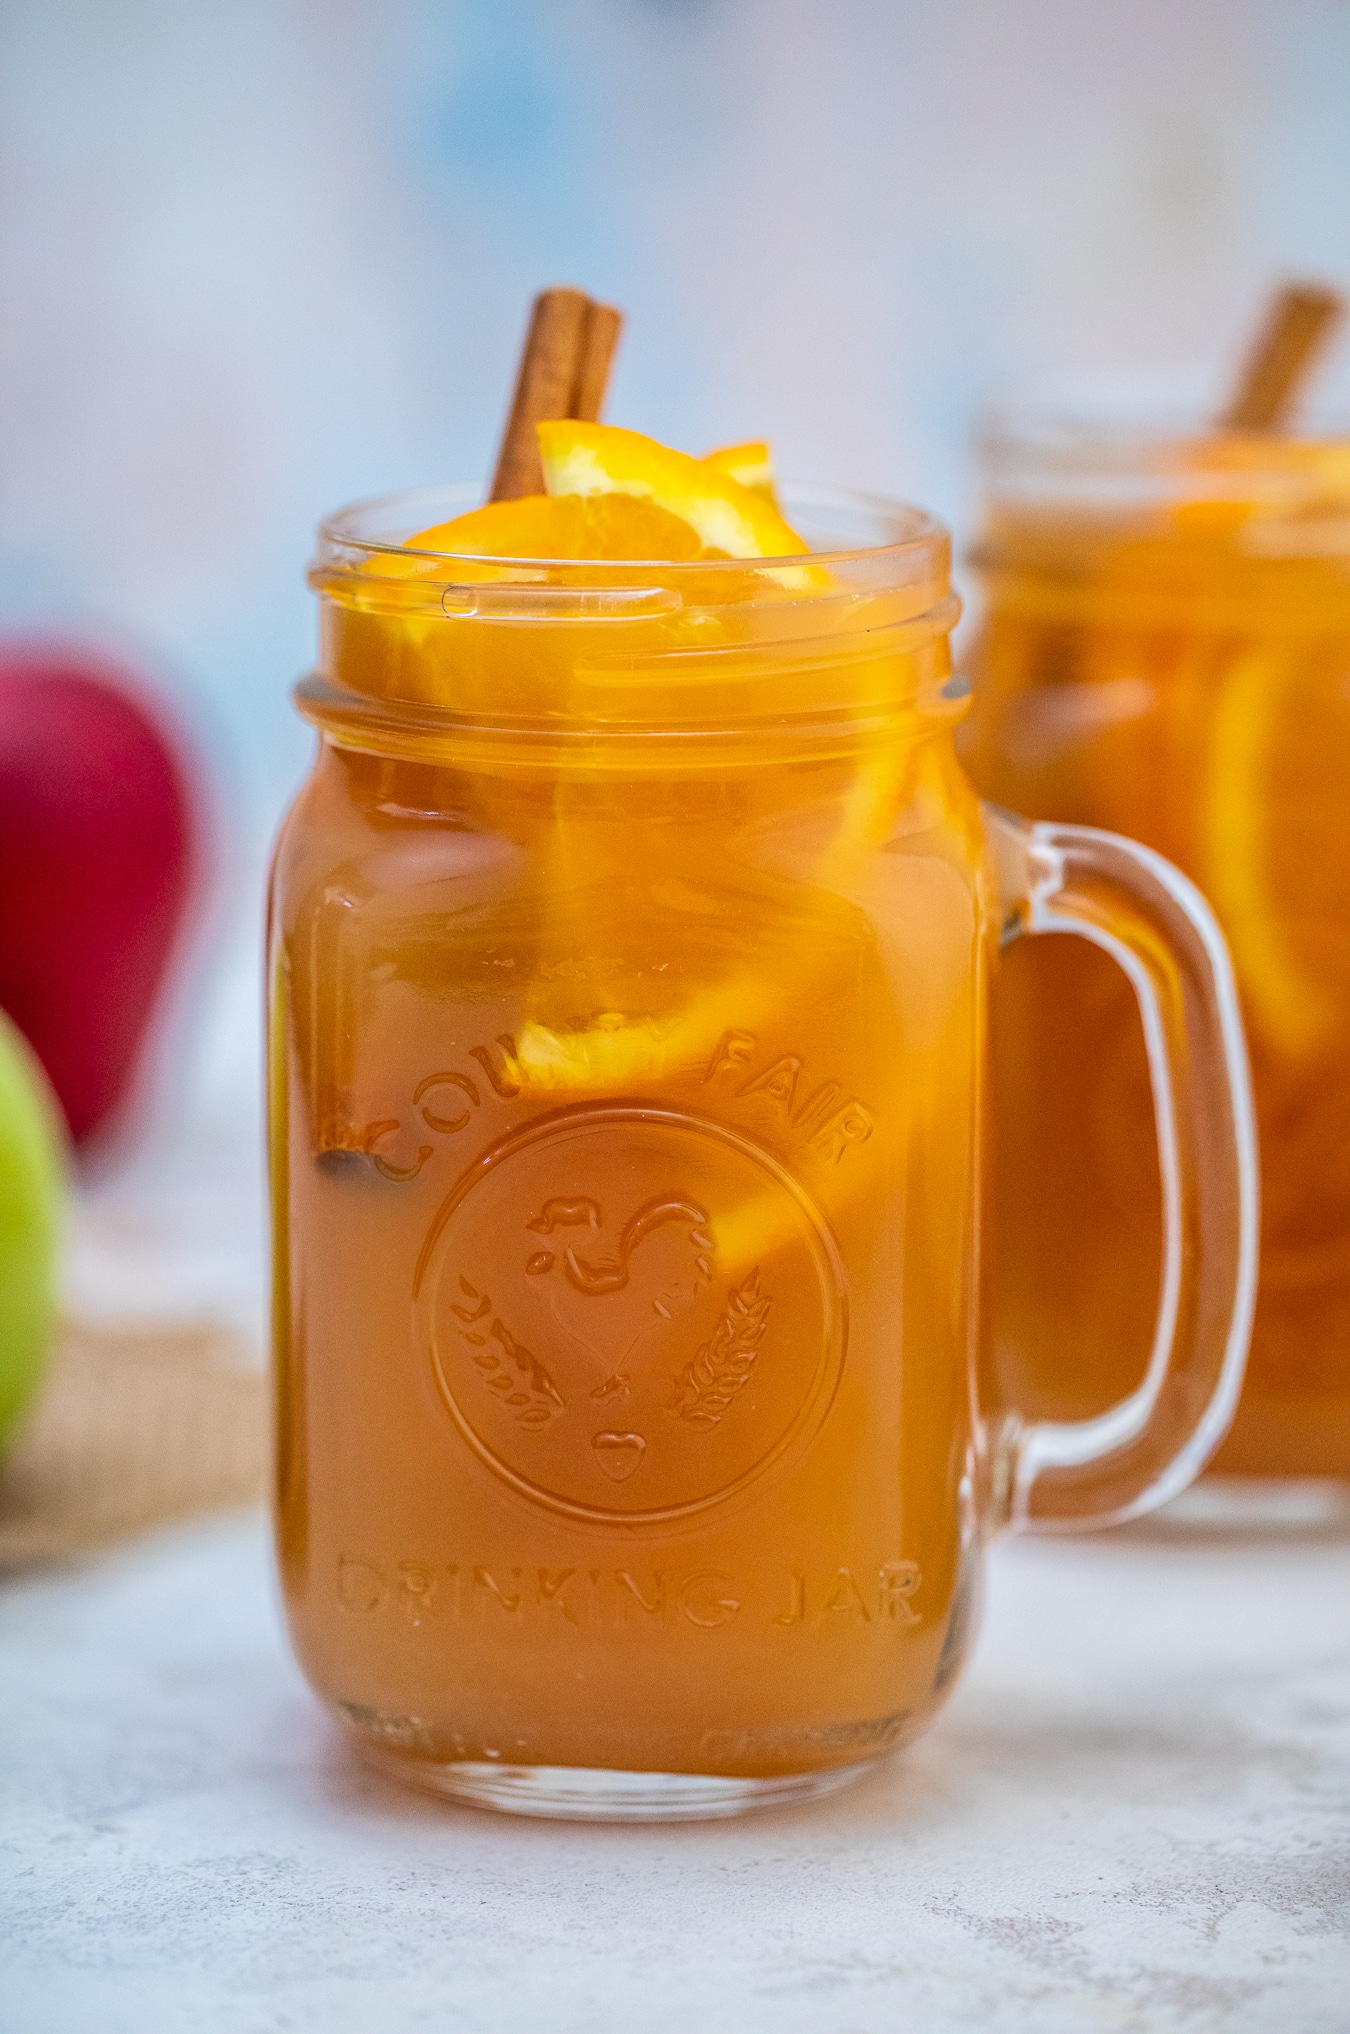 Homemade Apple Cider Recipe [VIDEO] - Sweet and Savory Meals